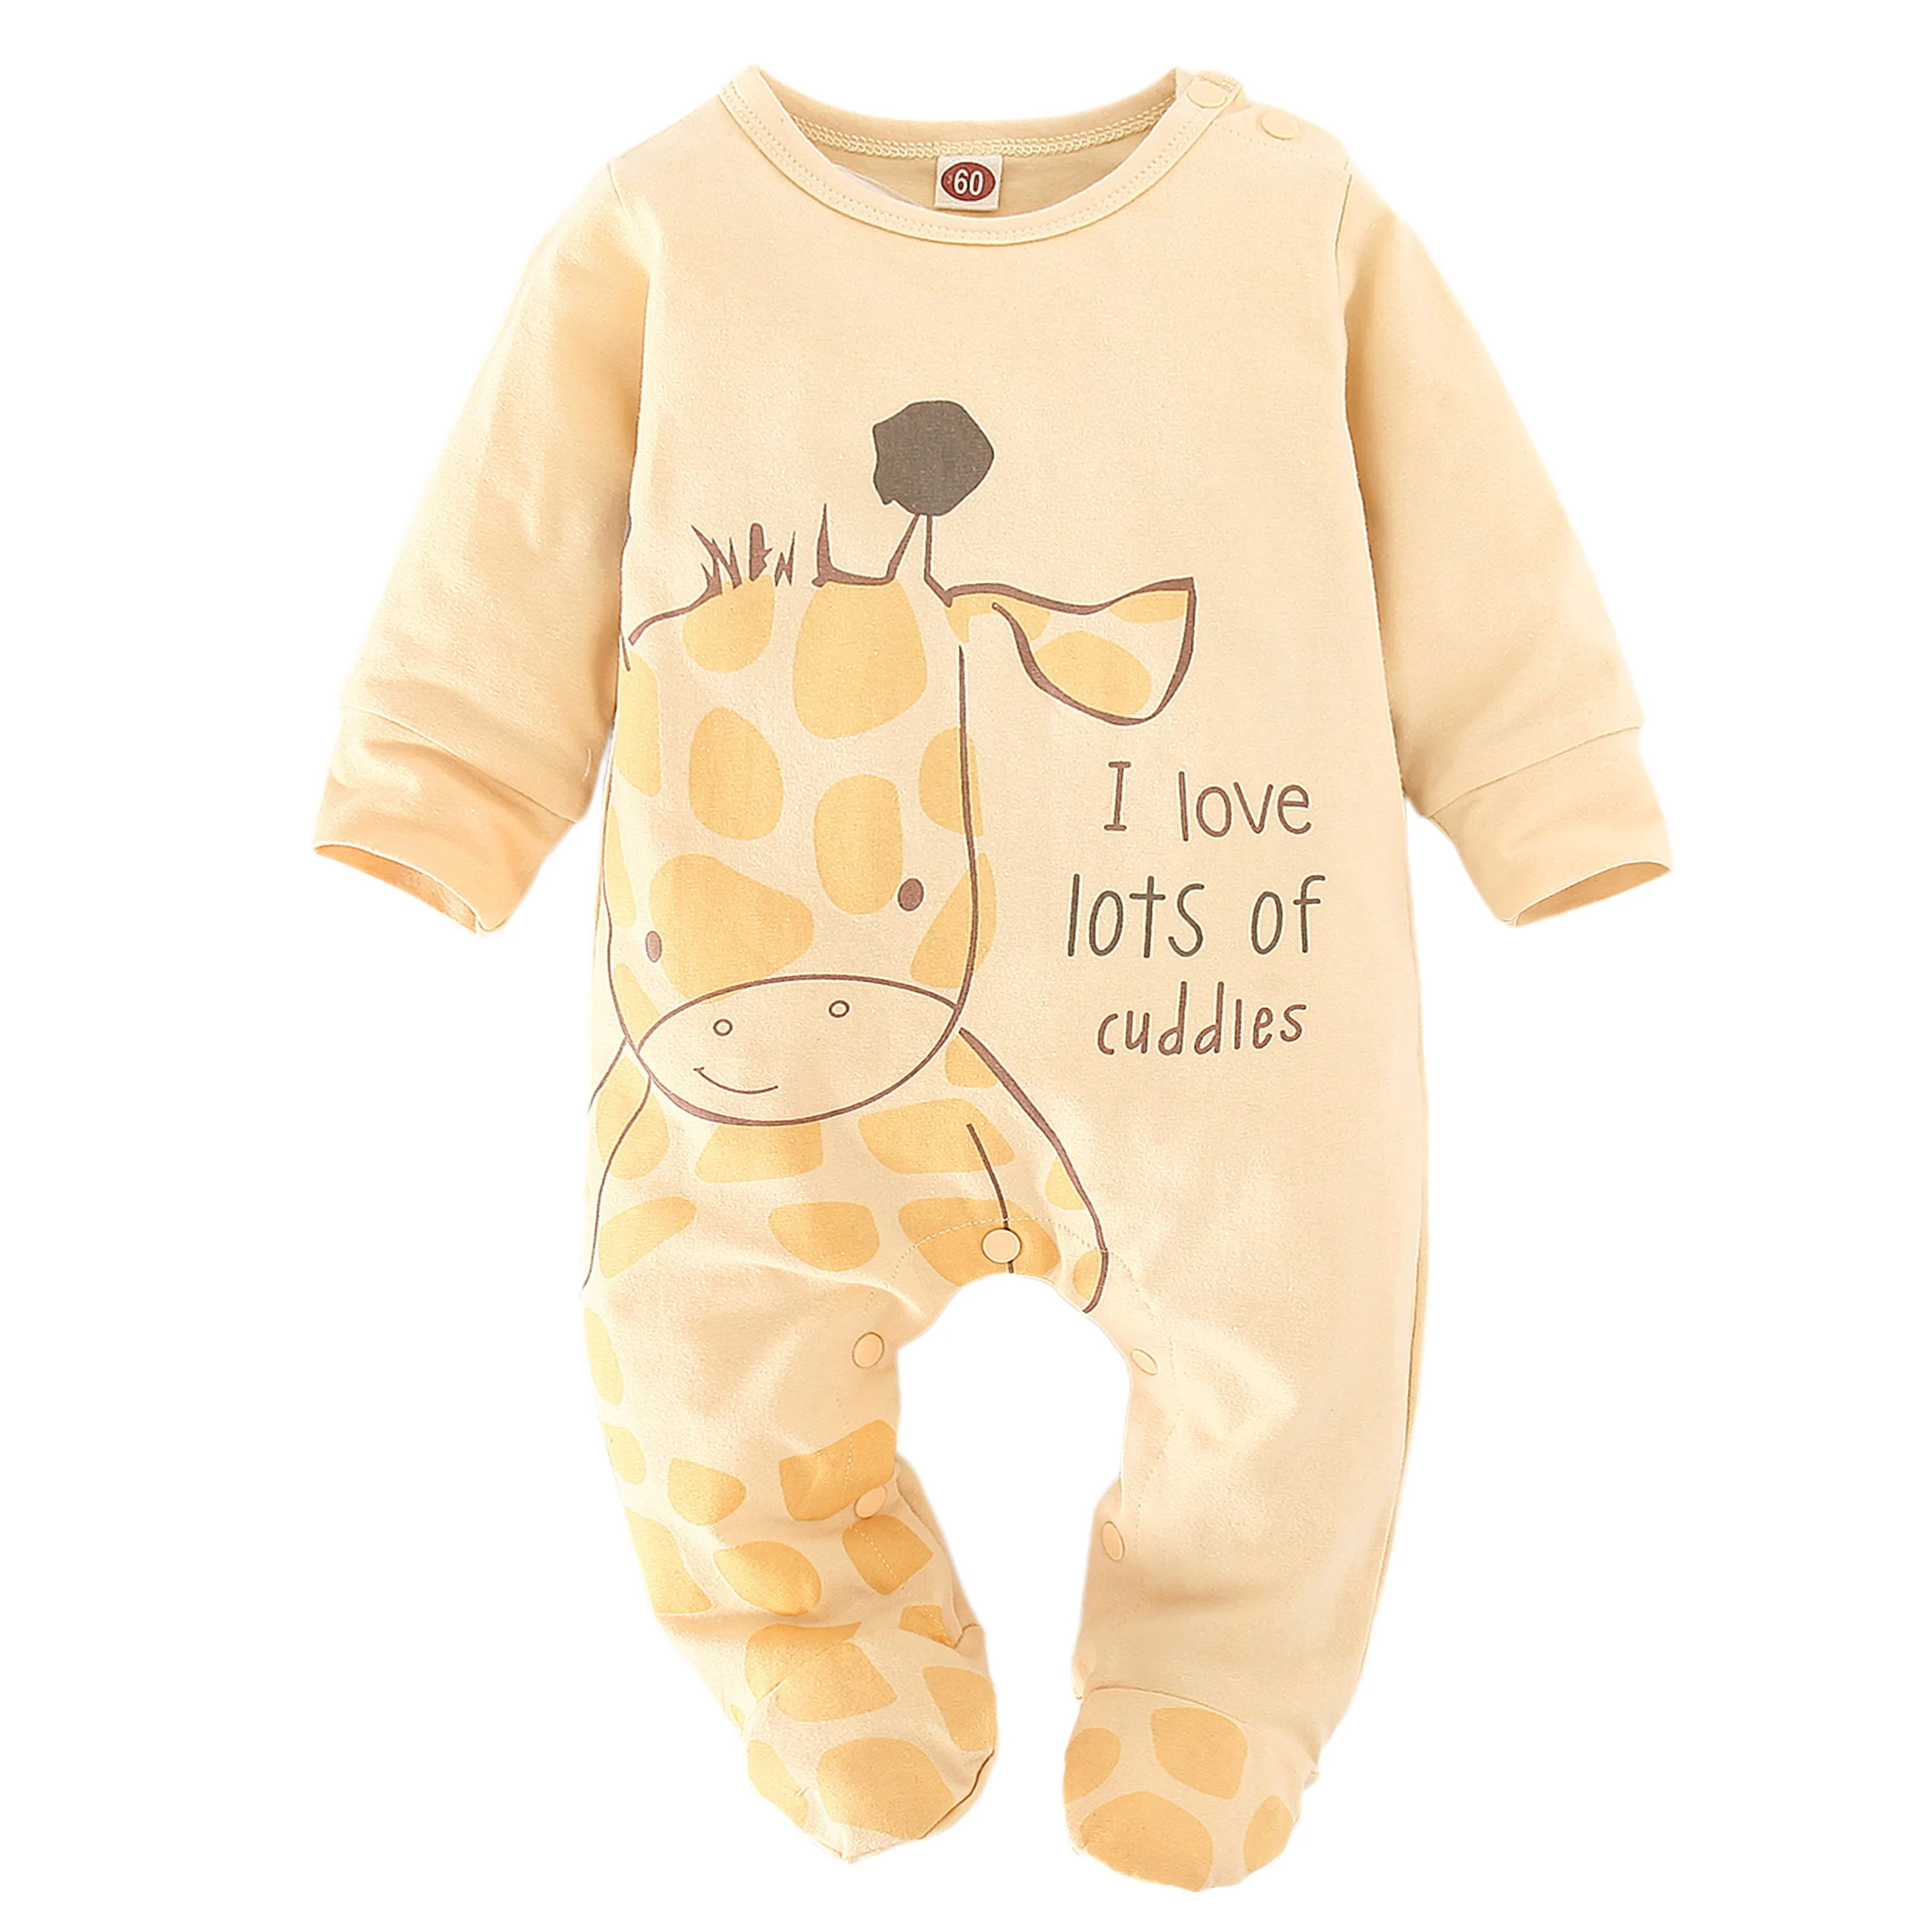 Baby Boys Girls Romper Cotton Long Sleeve Cute animal printing Jumpsuit Newborn Clothes Autumn Baby Clothing set  Outfits best Baby Bodysuits Baby Rompers